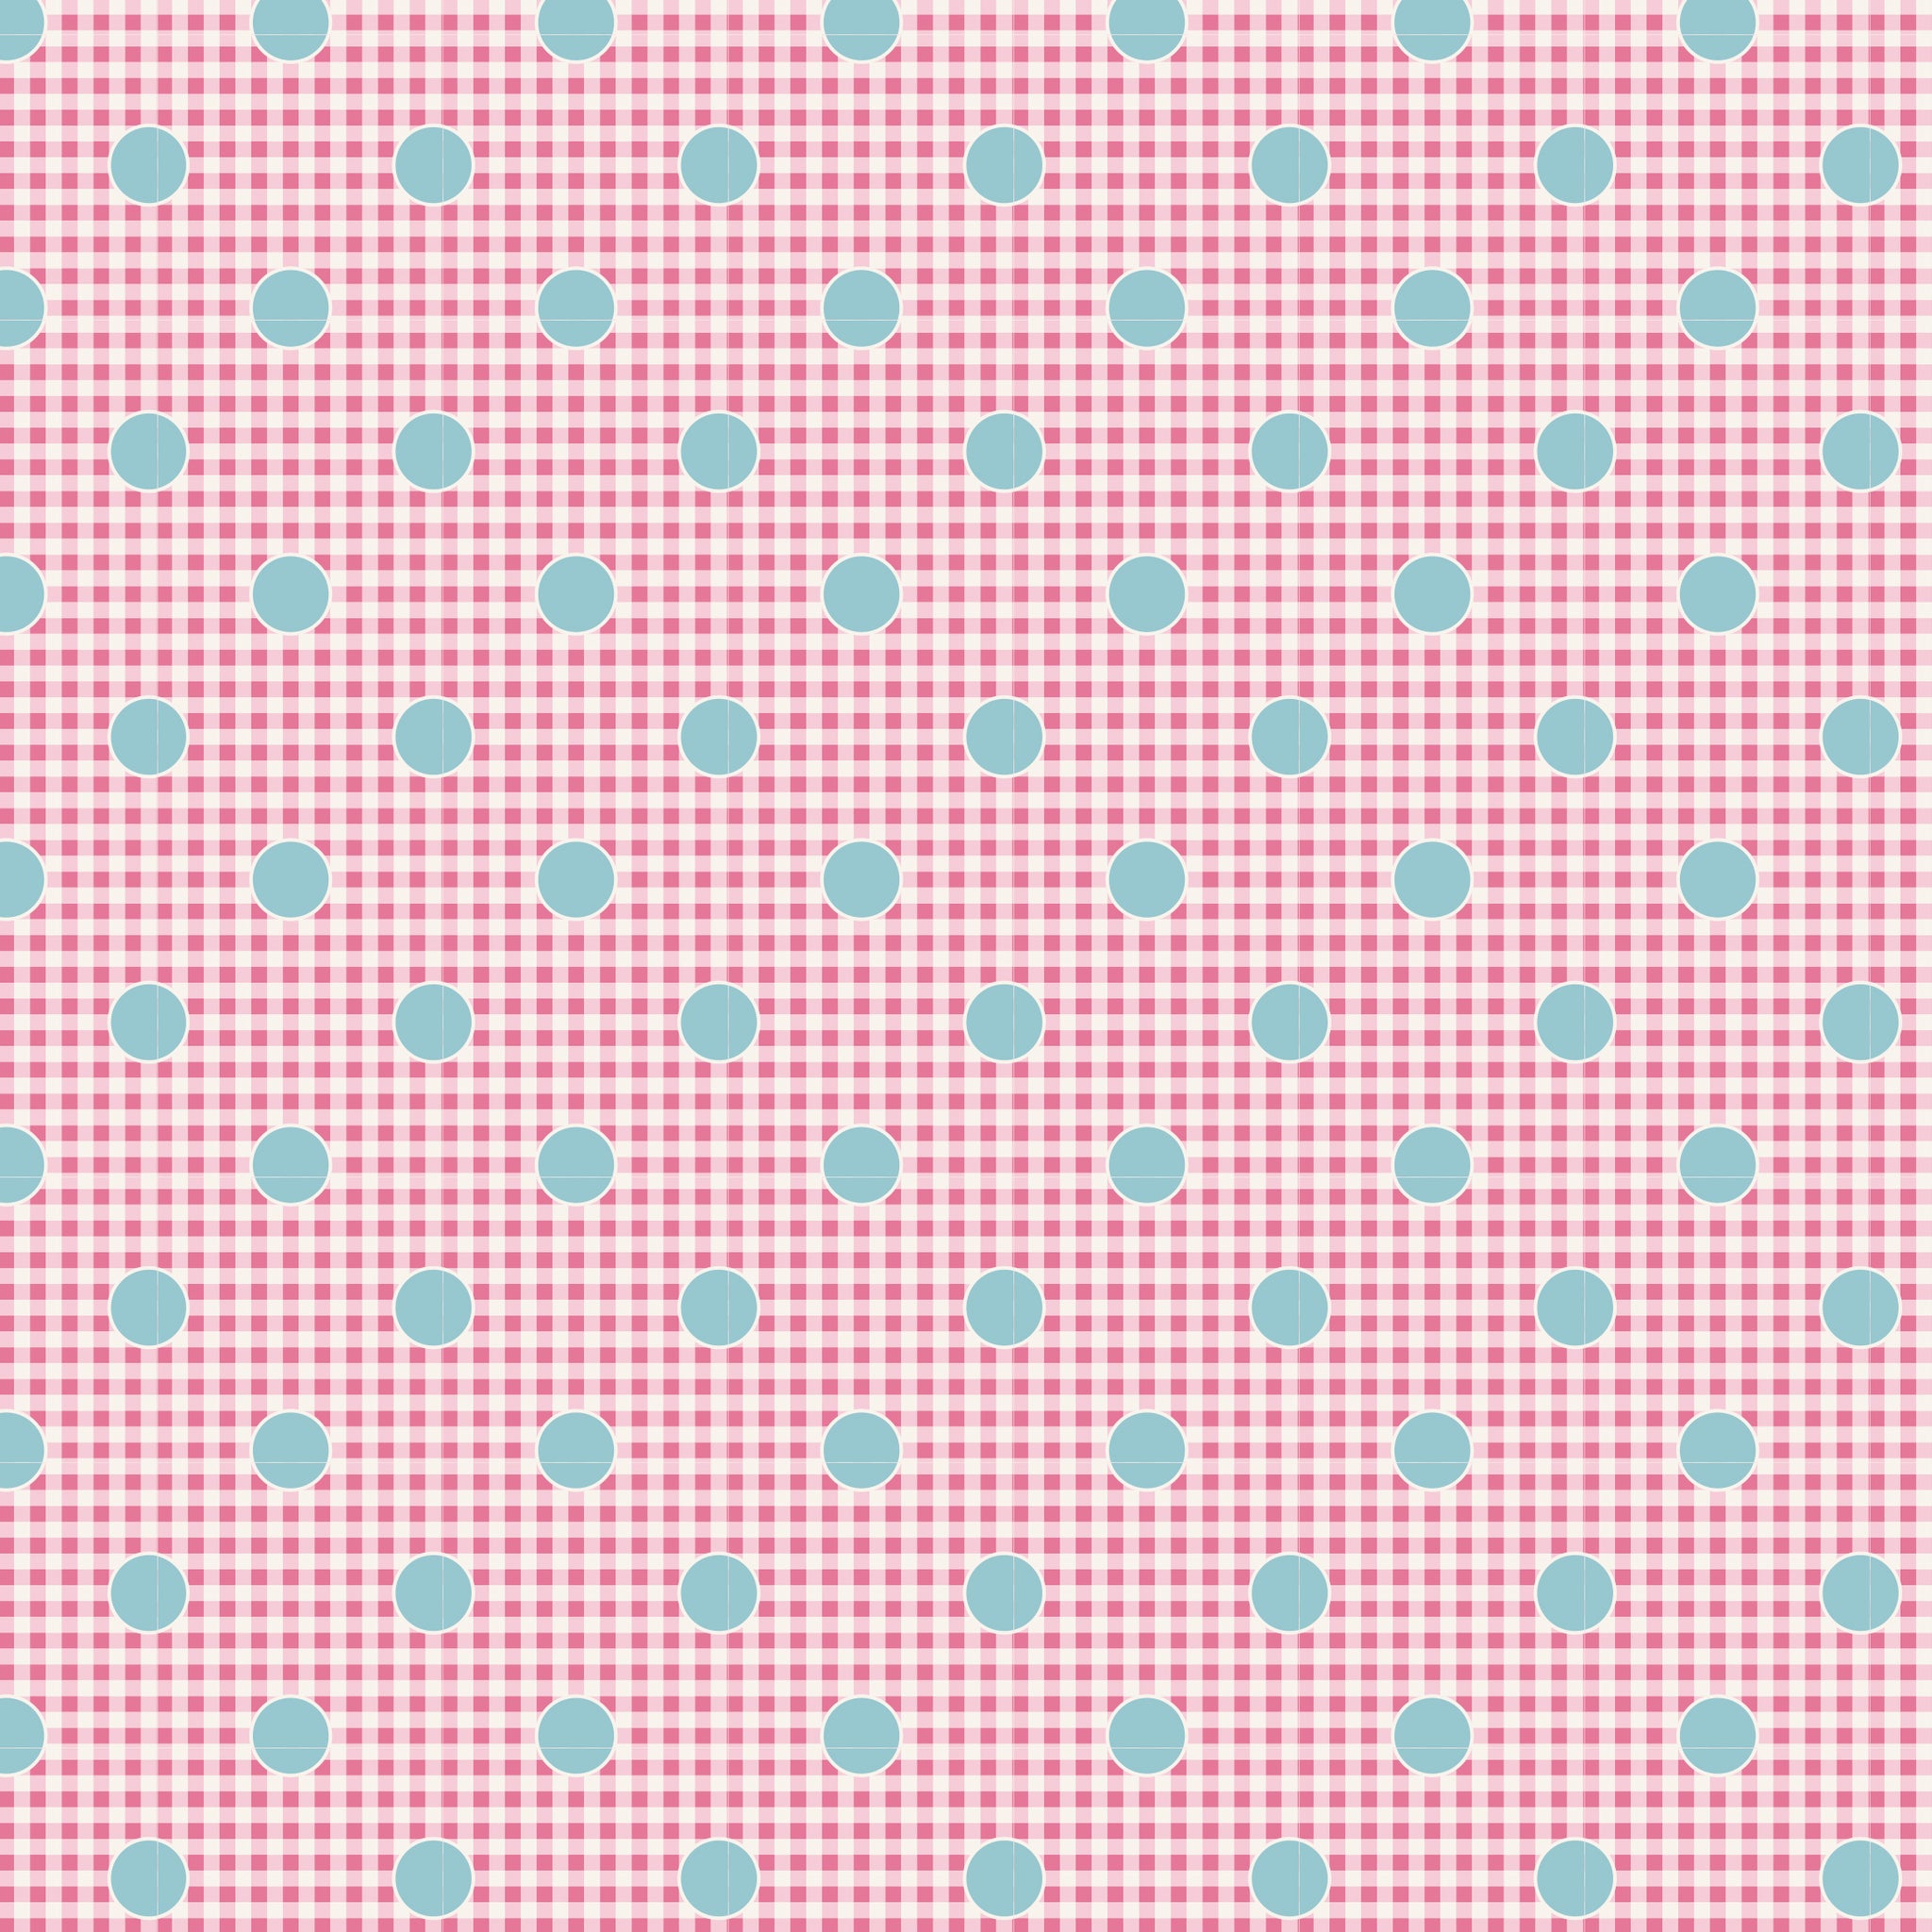 Gingdot Rose Cotton Fabric, Happy Campers Collection, Tilda 100232